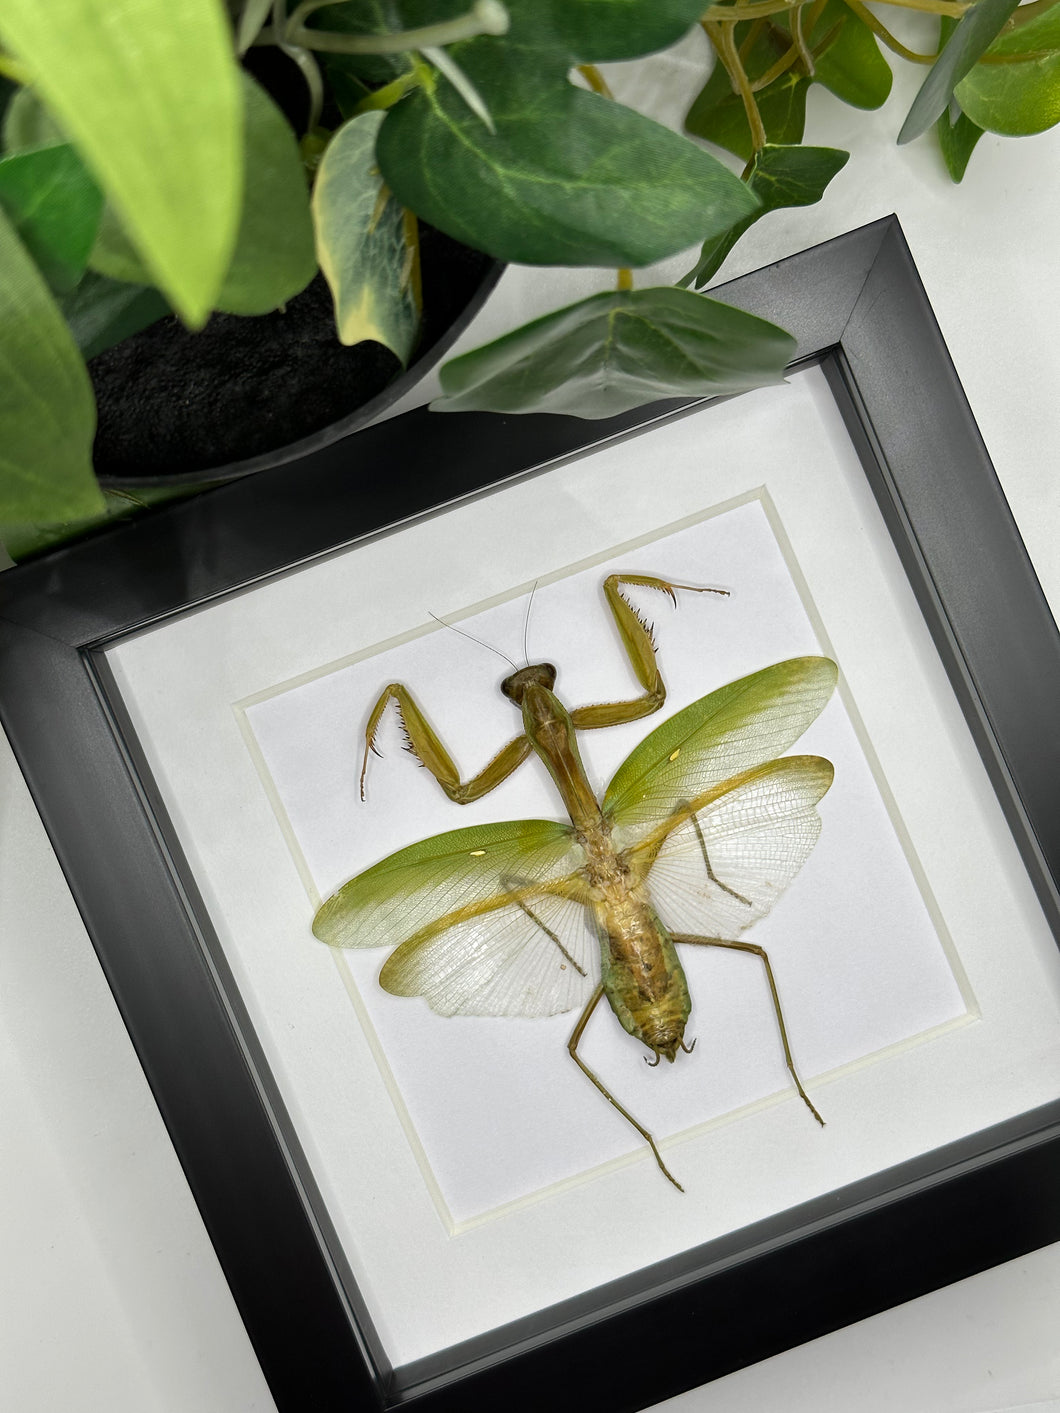 Green Mantis sp. in a square frame